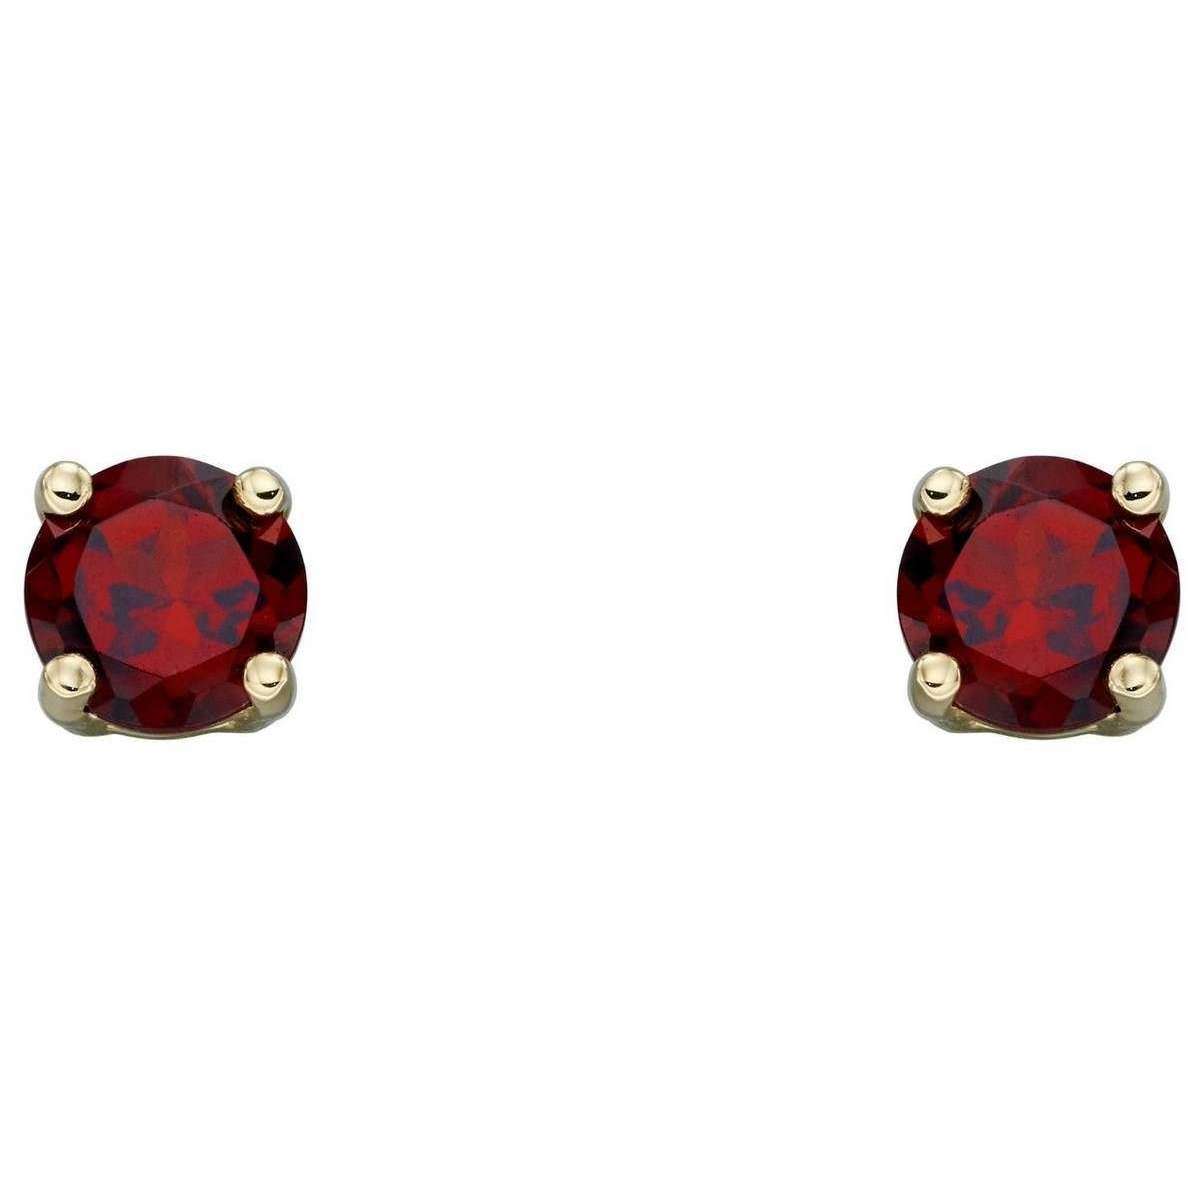 Elements Gold January Birthstone Stud Earrings - Red/Gold